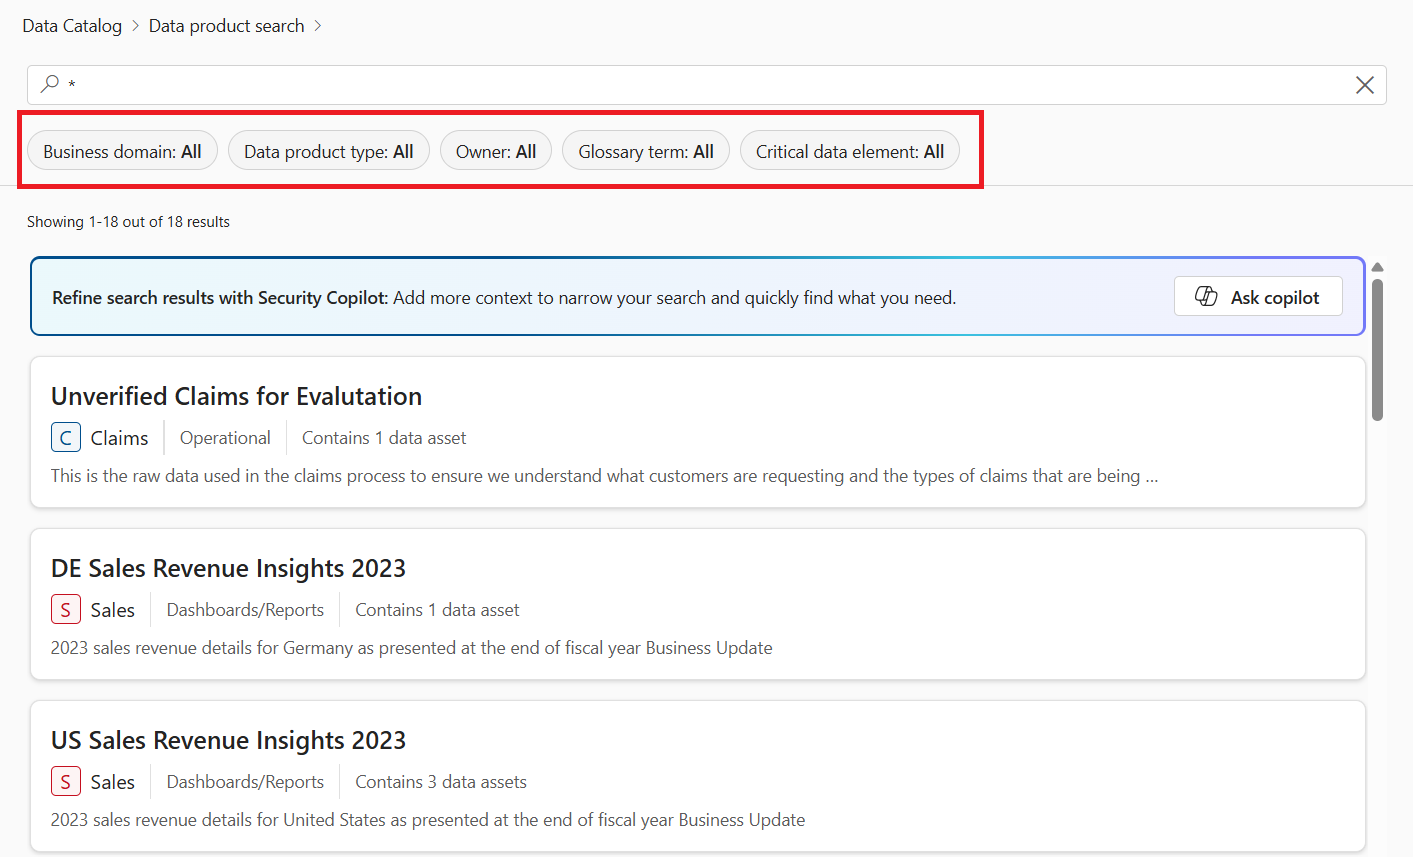 Screenshot of the data products page in the Microsoft Purview Data Catalog.